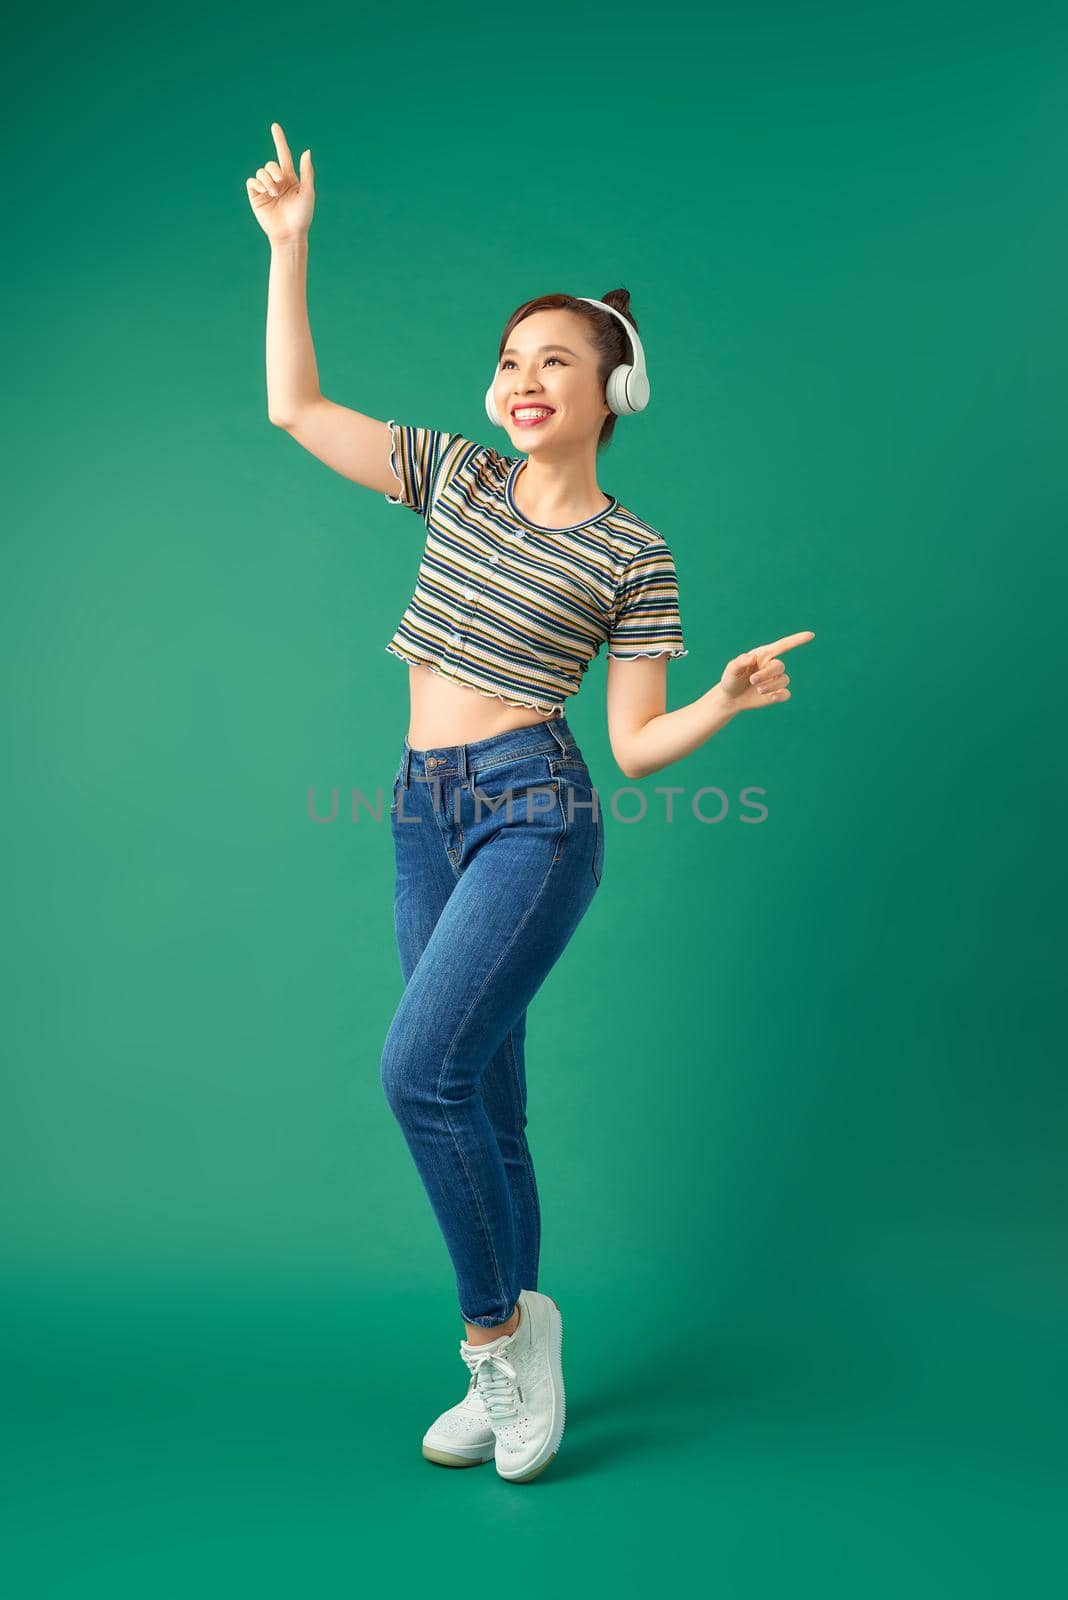 Full length portrait of joyful Asian woman on casual clothing dancing and listening to music with headphone over green background.